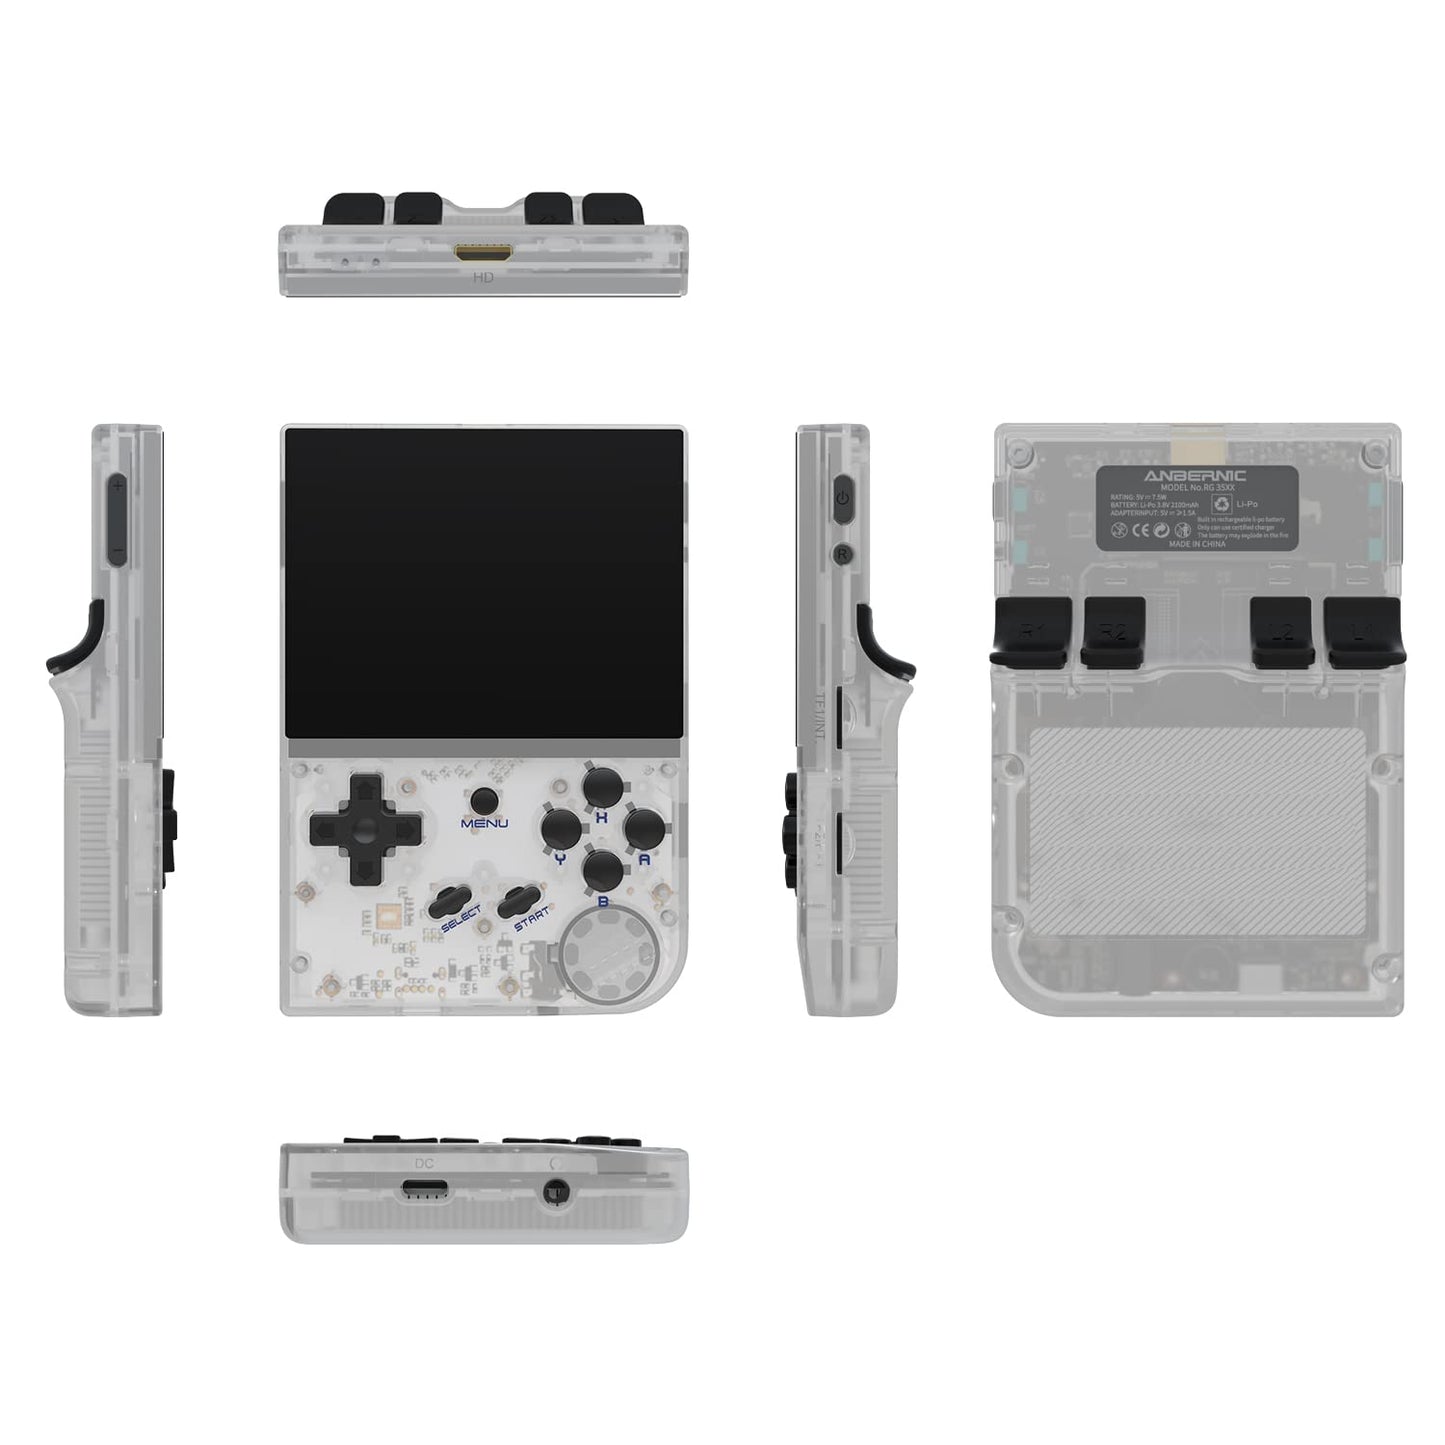 Anbernic RG35XX Retro Handheld Game Console -64Gb TF Card with 5474 Built In Arcade Games- Handheld Emulator 3.5 IPS OCA Screen-Linux System-HDMI TV Output Plug & Play Video Games (RG35XX- White)